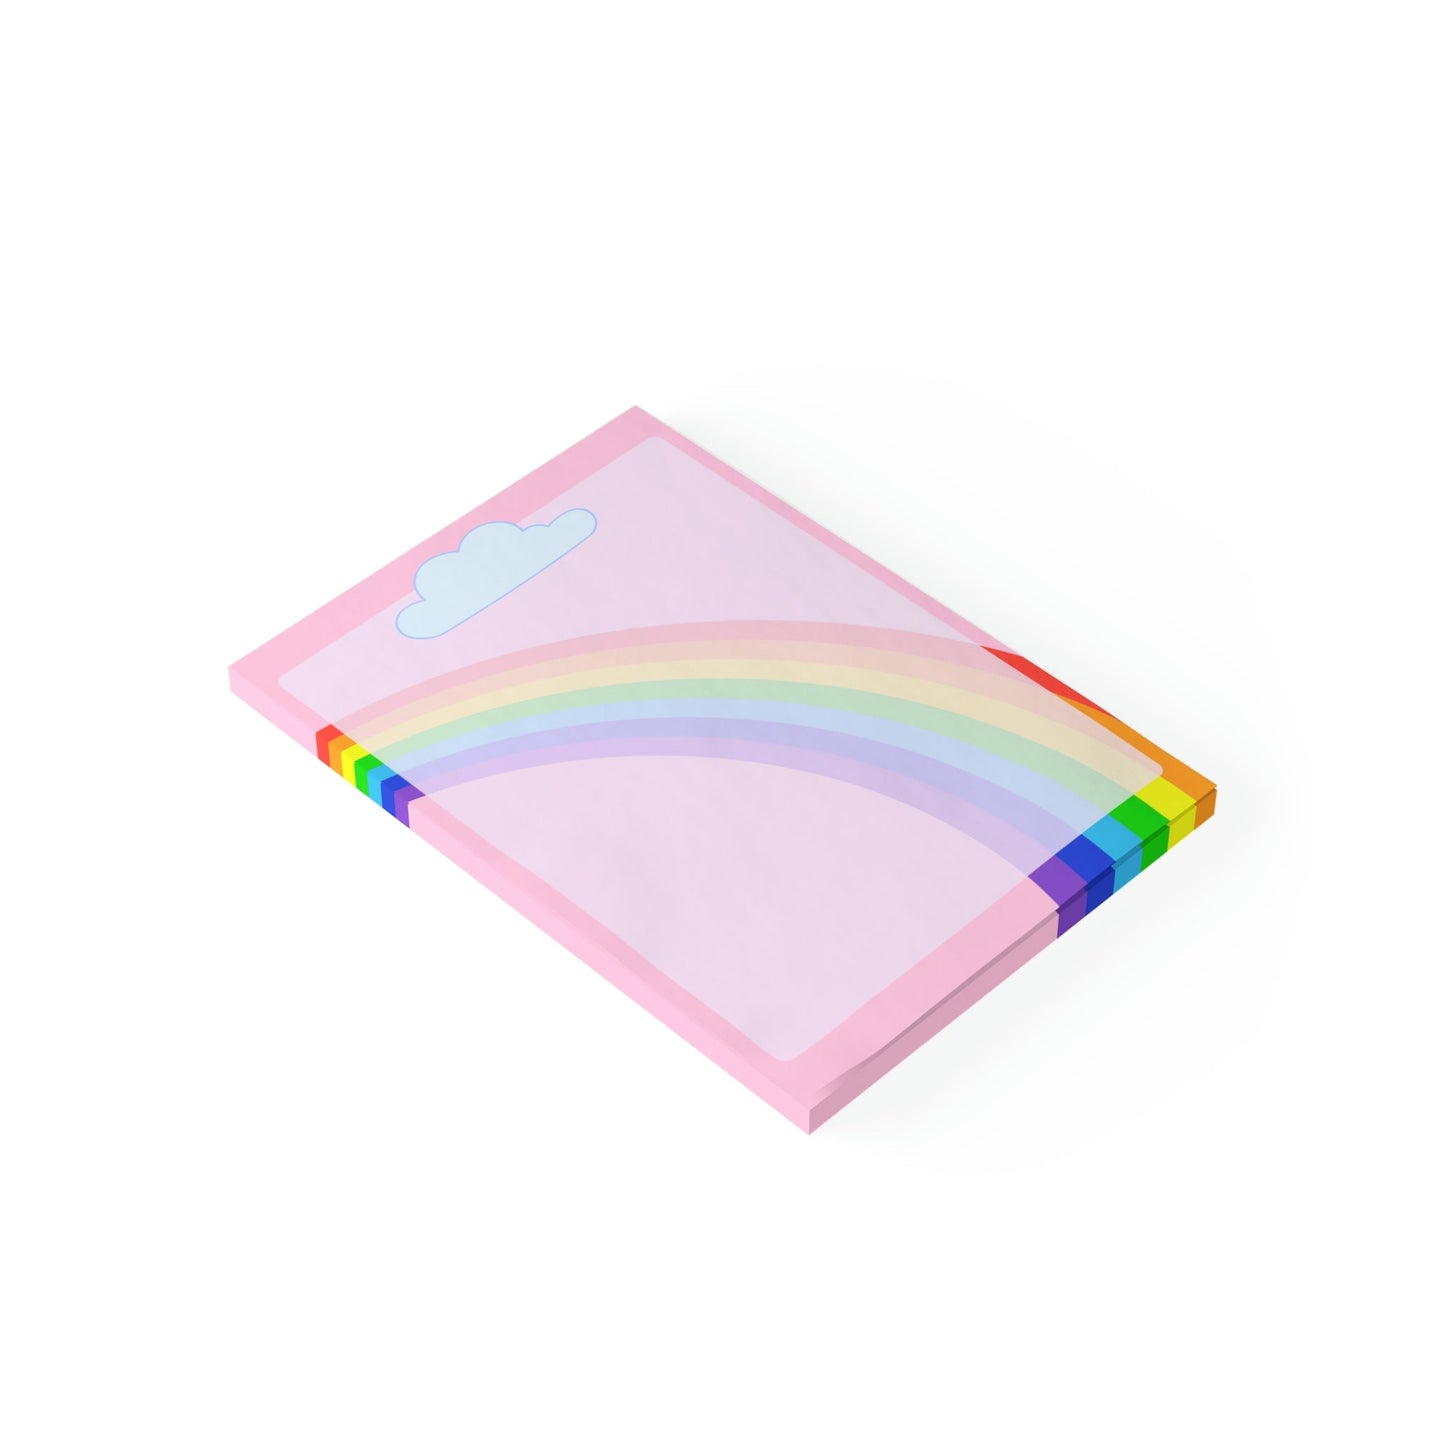 Precious Rainbow Post-it® Note Pad Paper products Pink Sweetheart